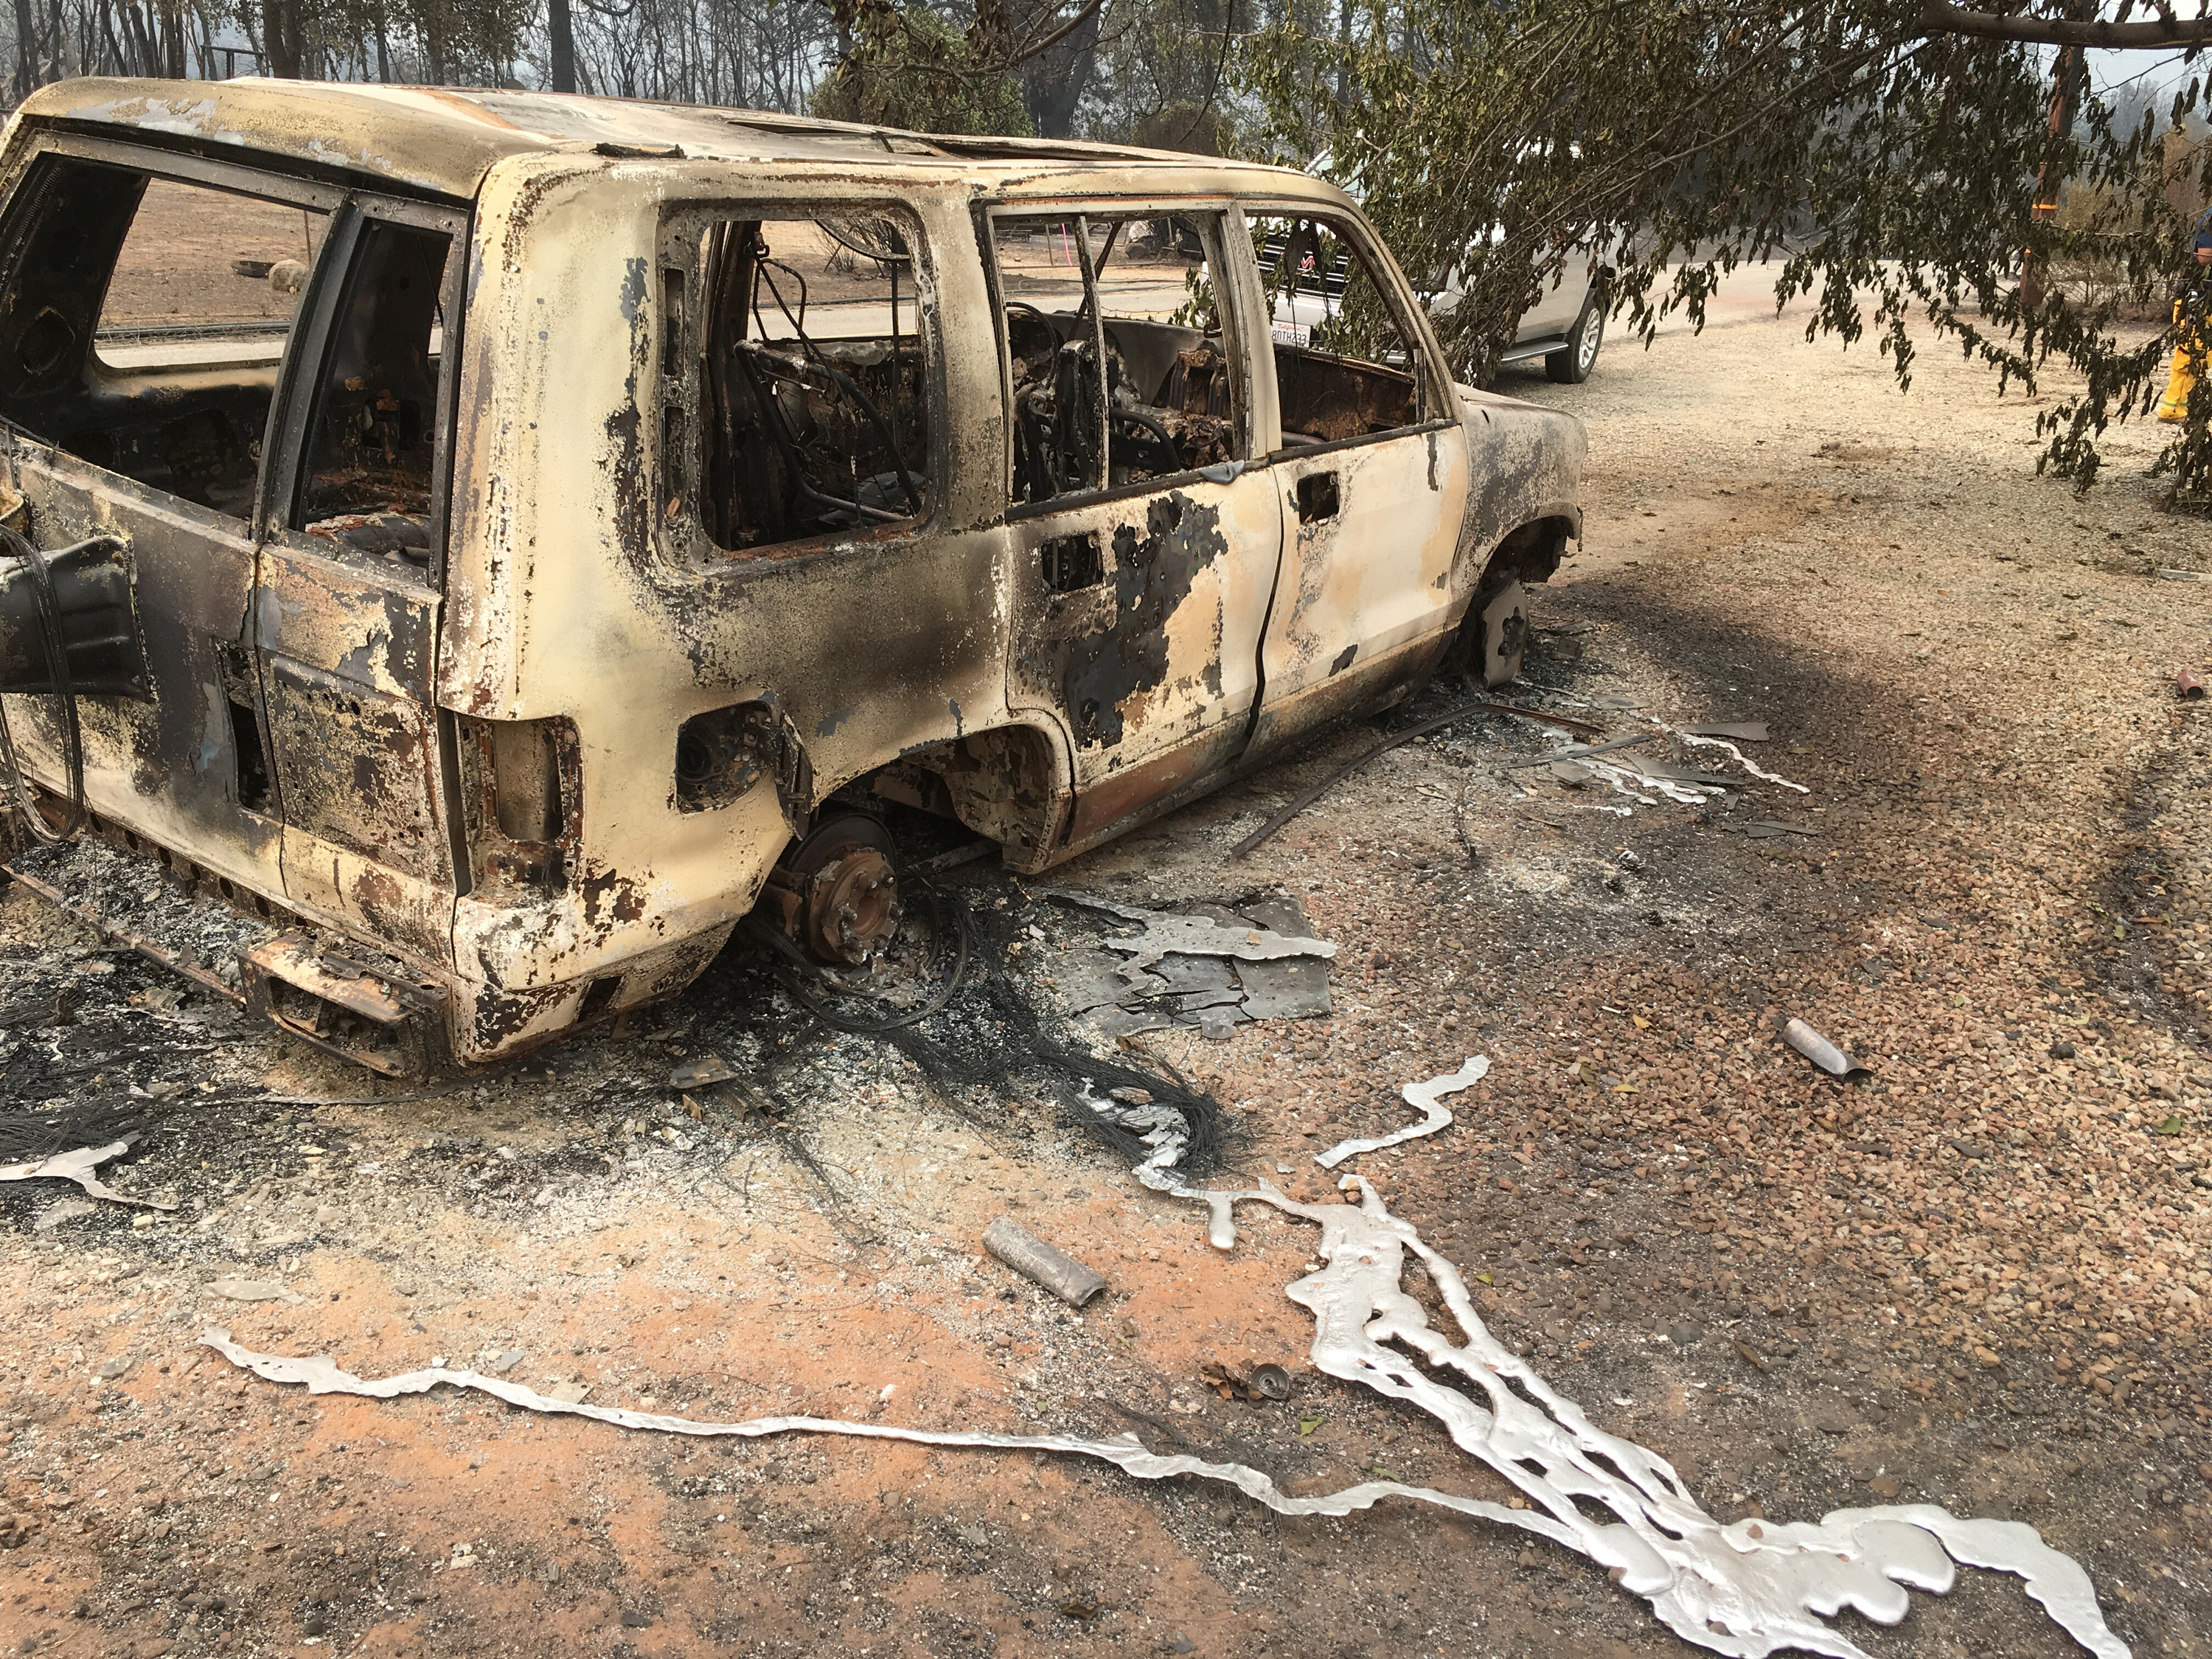 A burned vehicle in the mountain community of Keswick, California